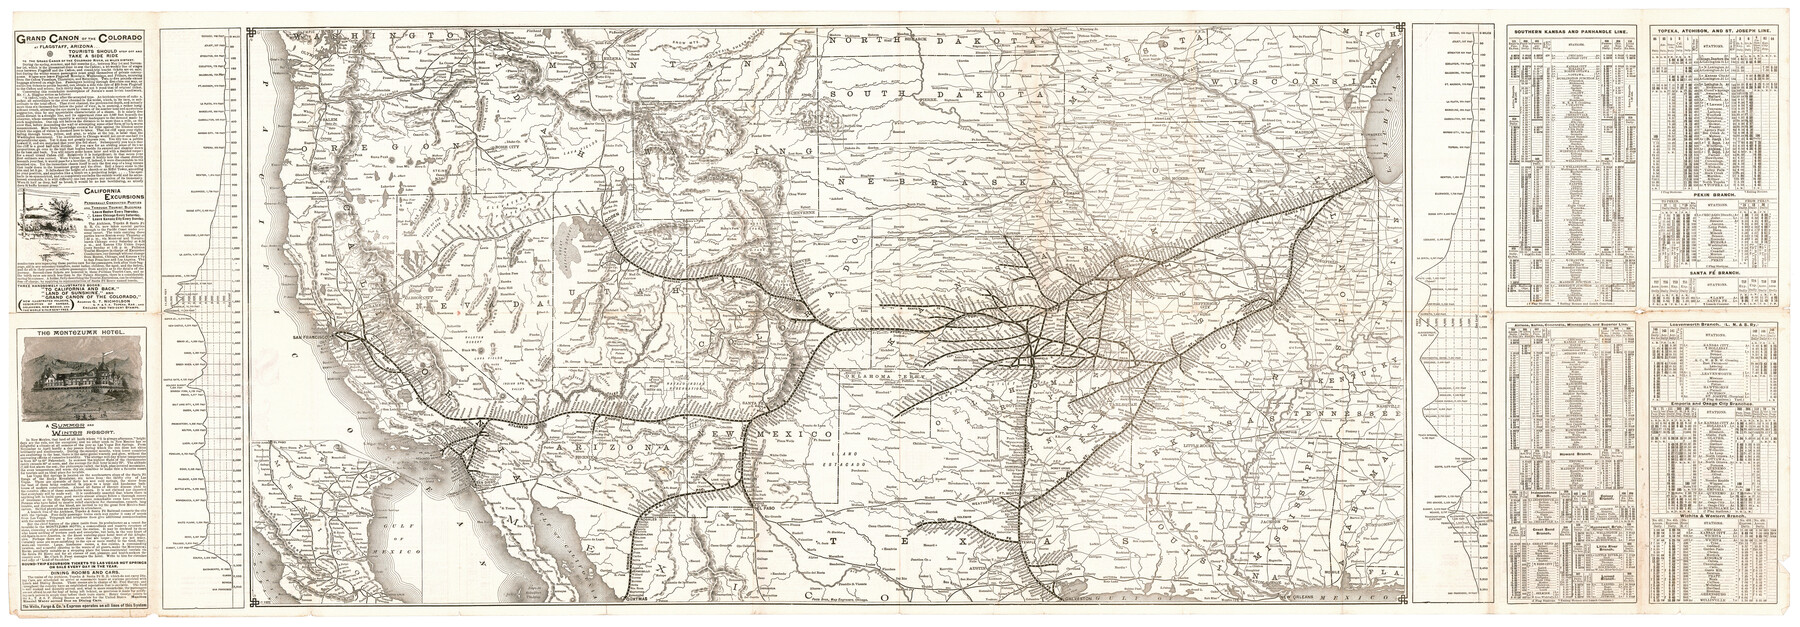 95866, [Map of Santa Fe Route - Atchison, Topeka, and Santa Fe Railroad], Cobb Digital Map Collection - 1